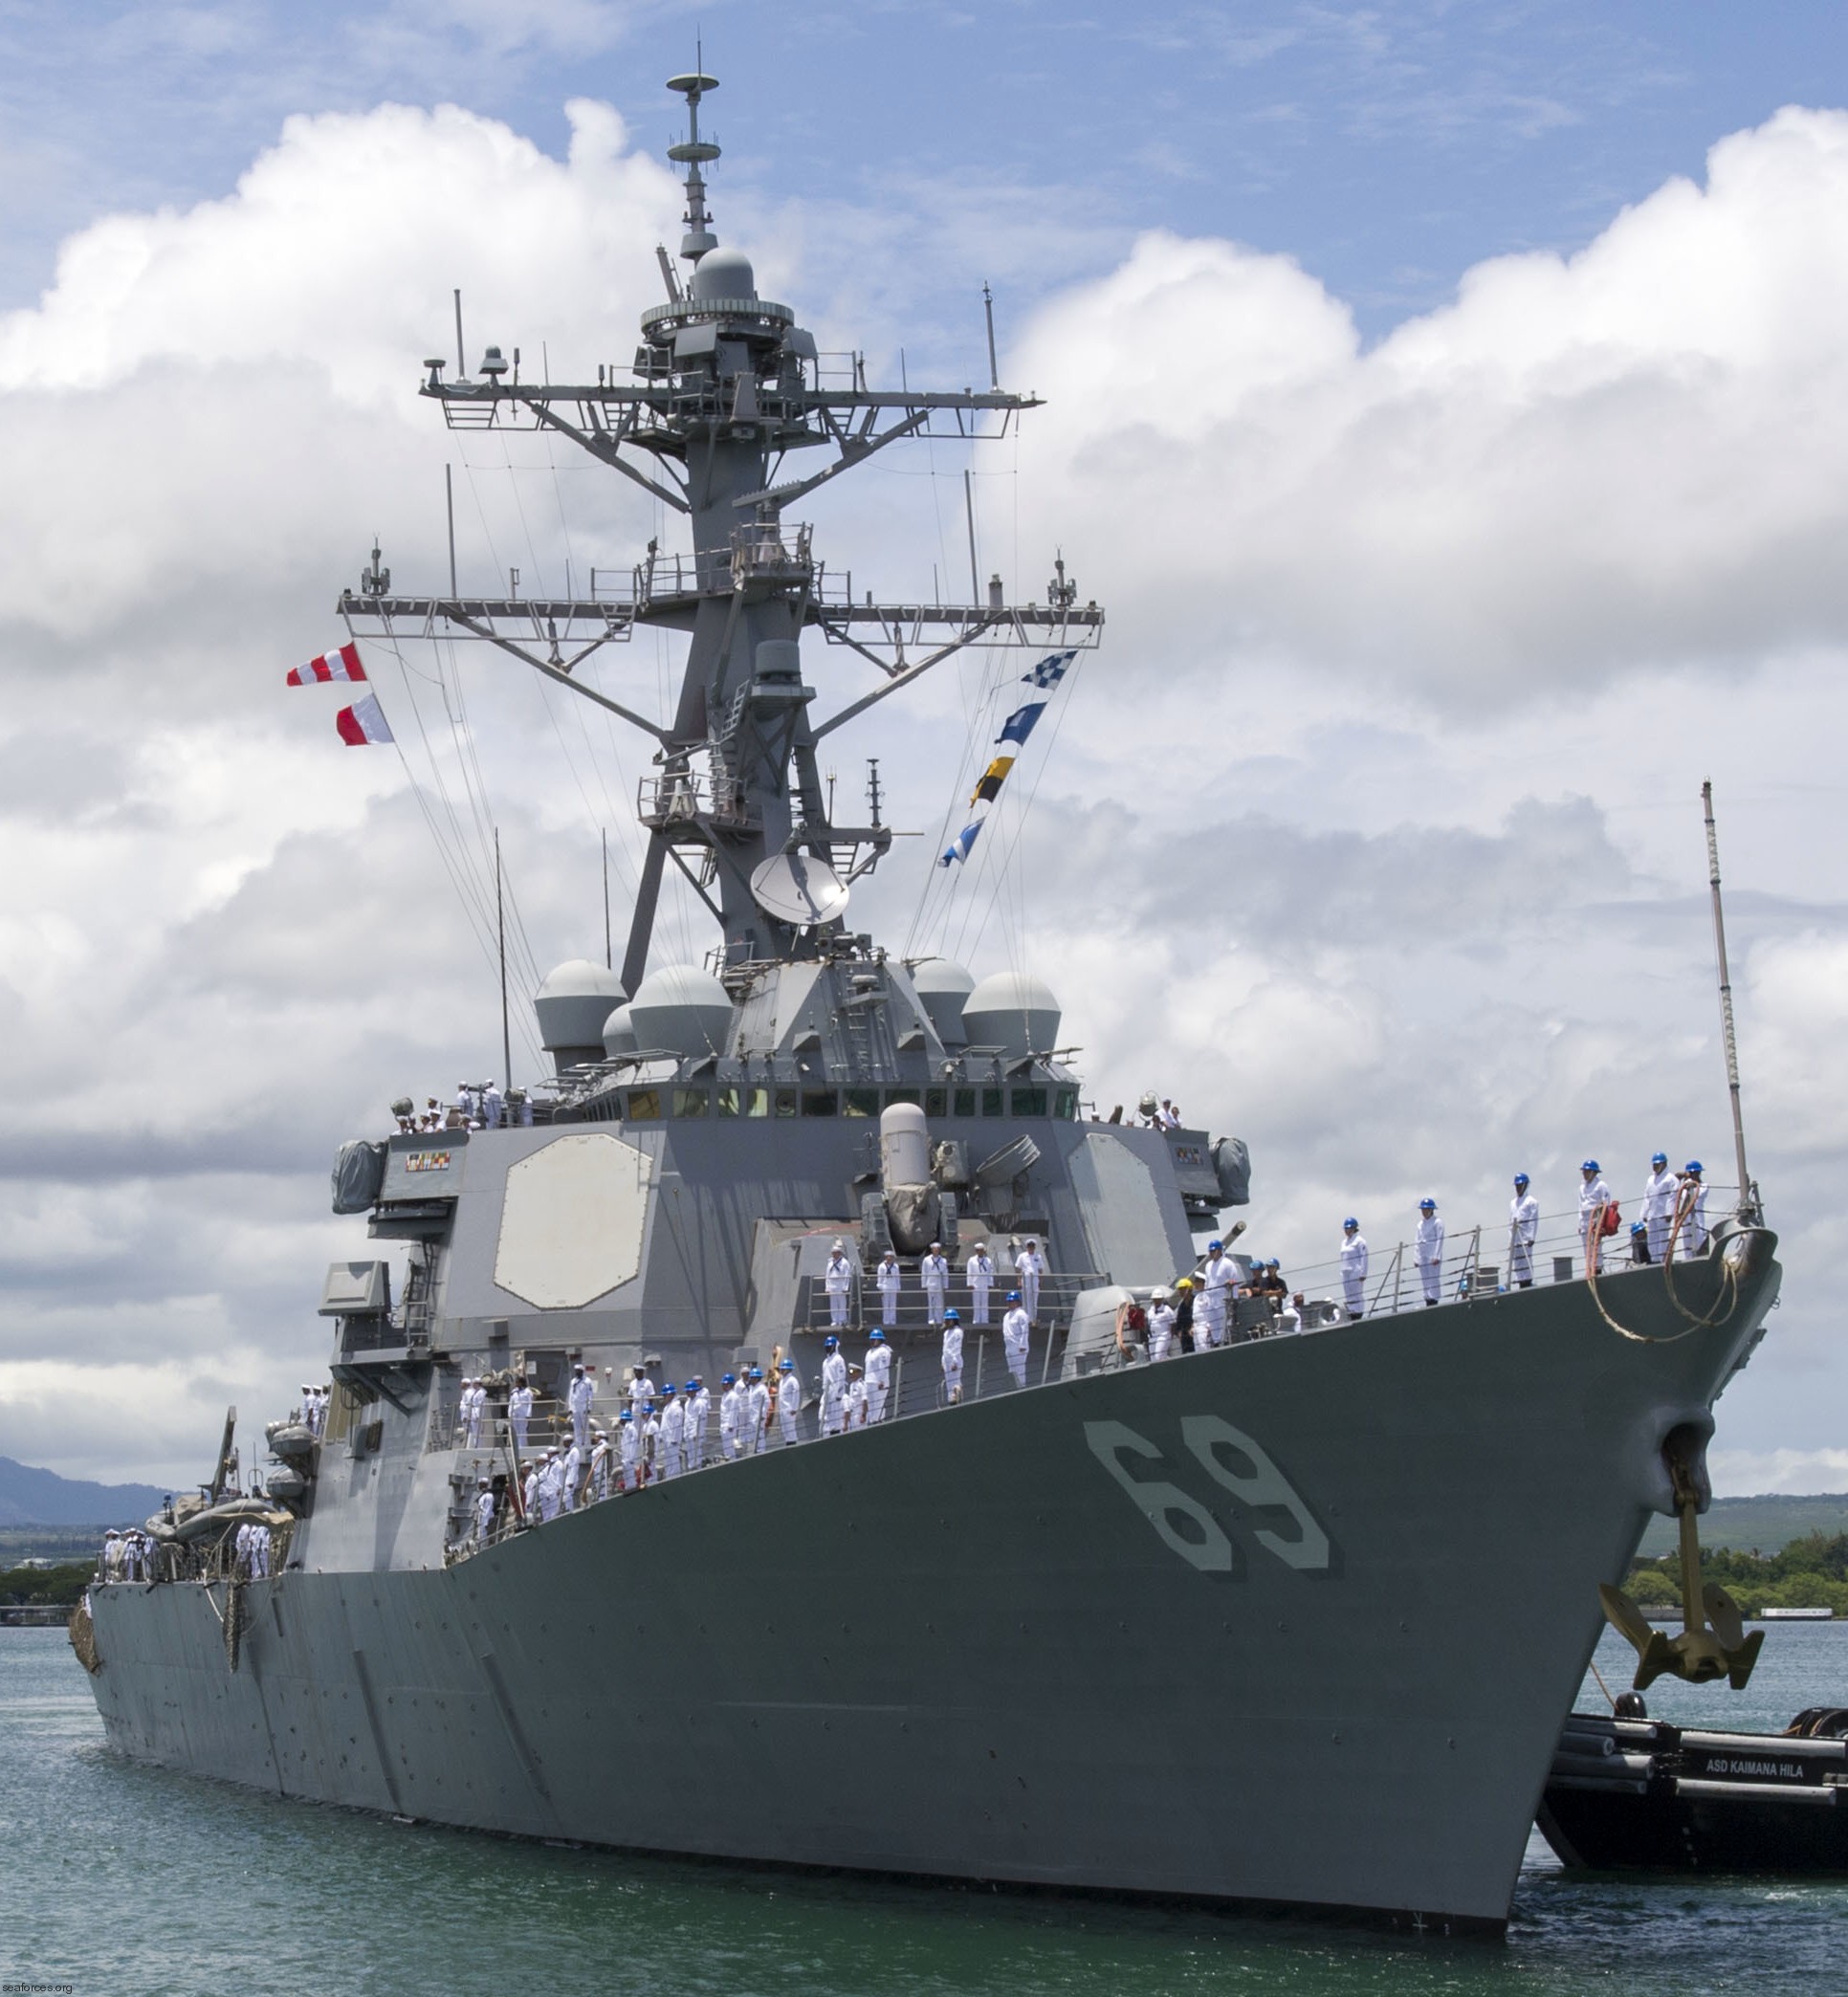 ddg-69 uss milius guided missile destroyer arleigh burke class aegis bmd 16a pearl harbor hawaii